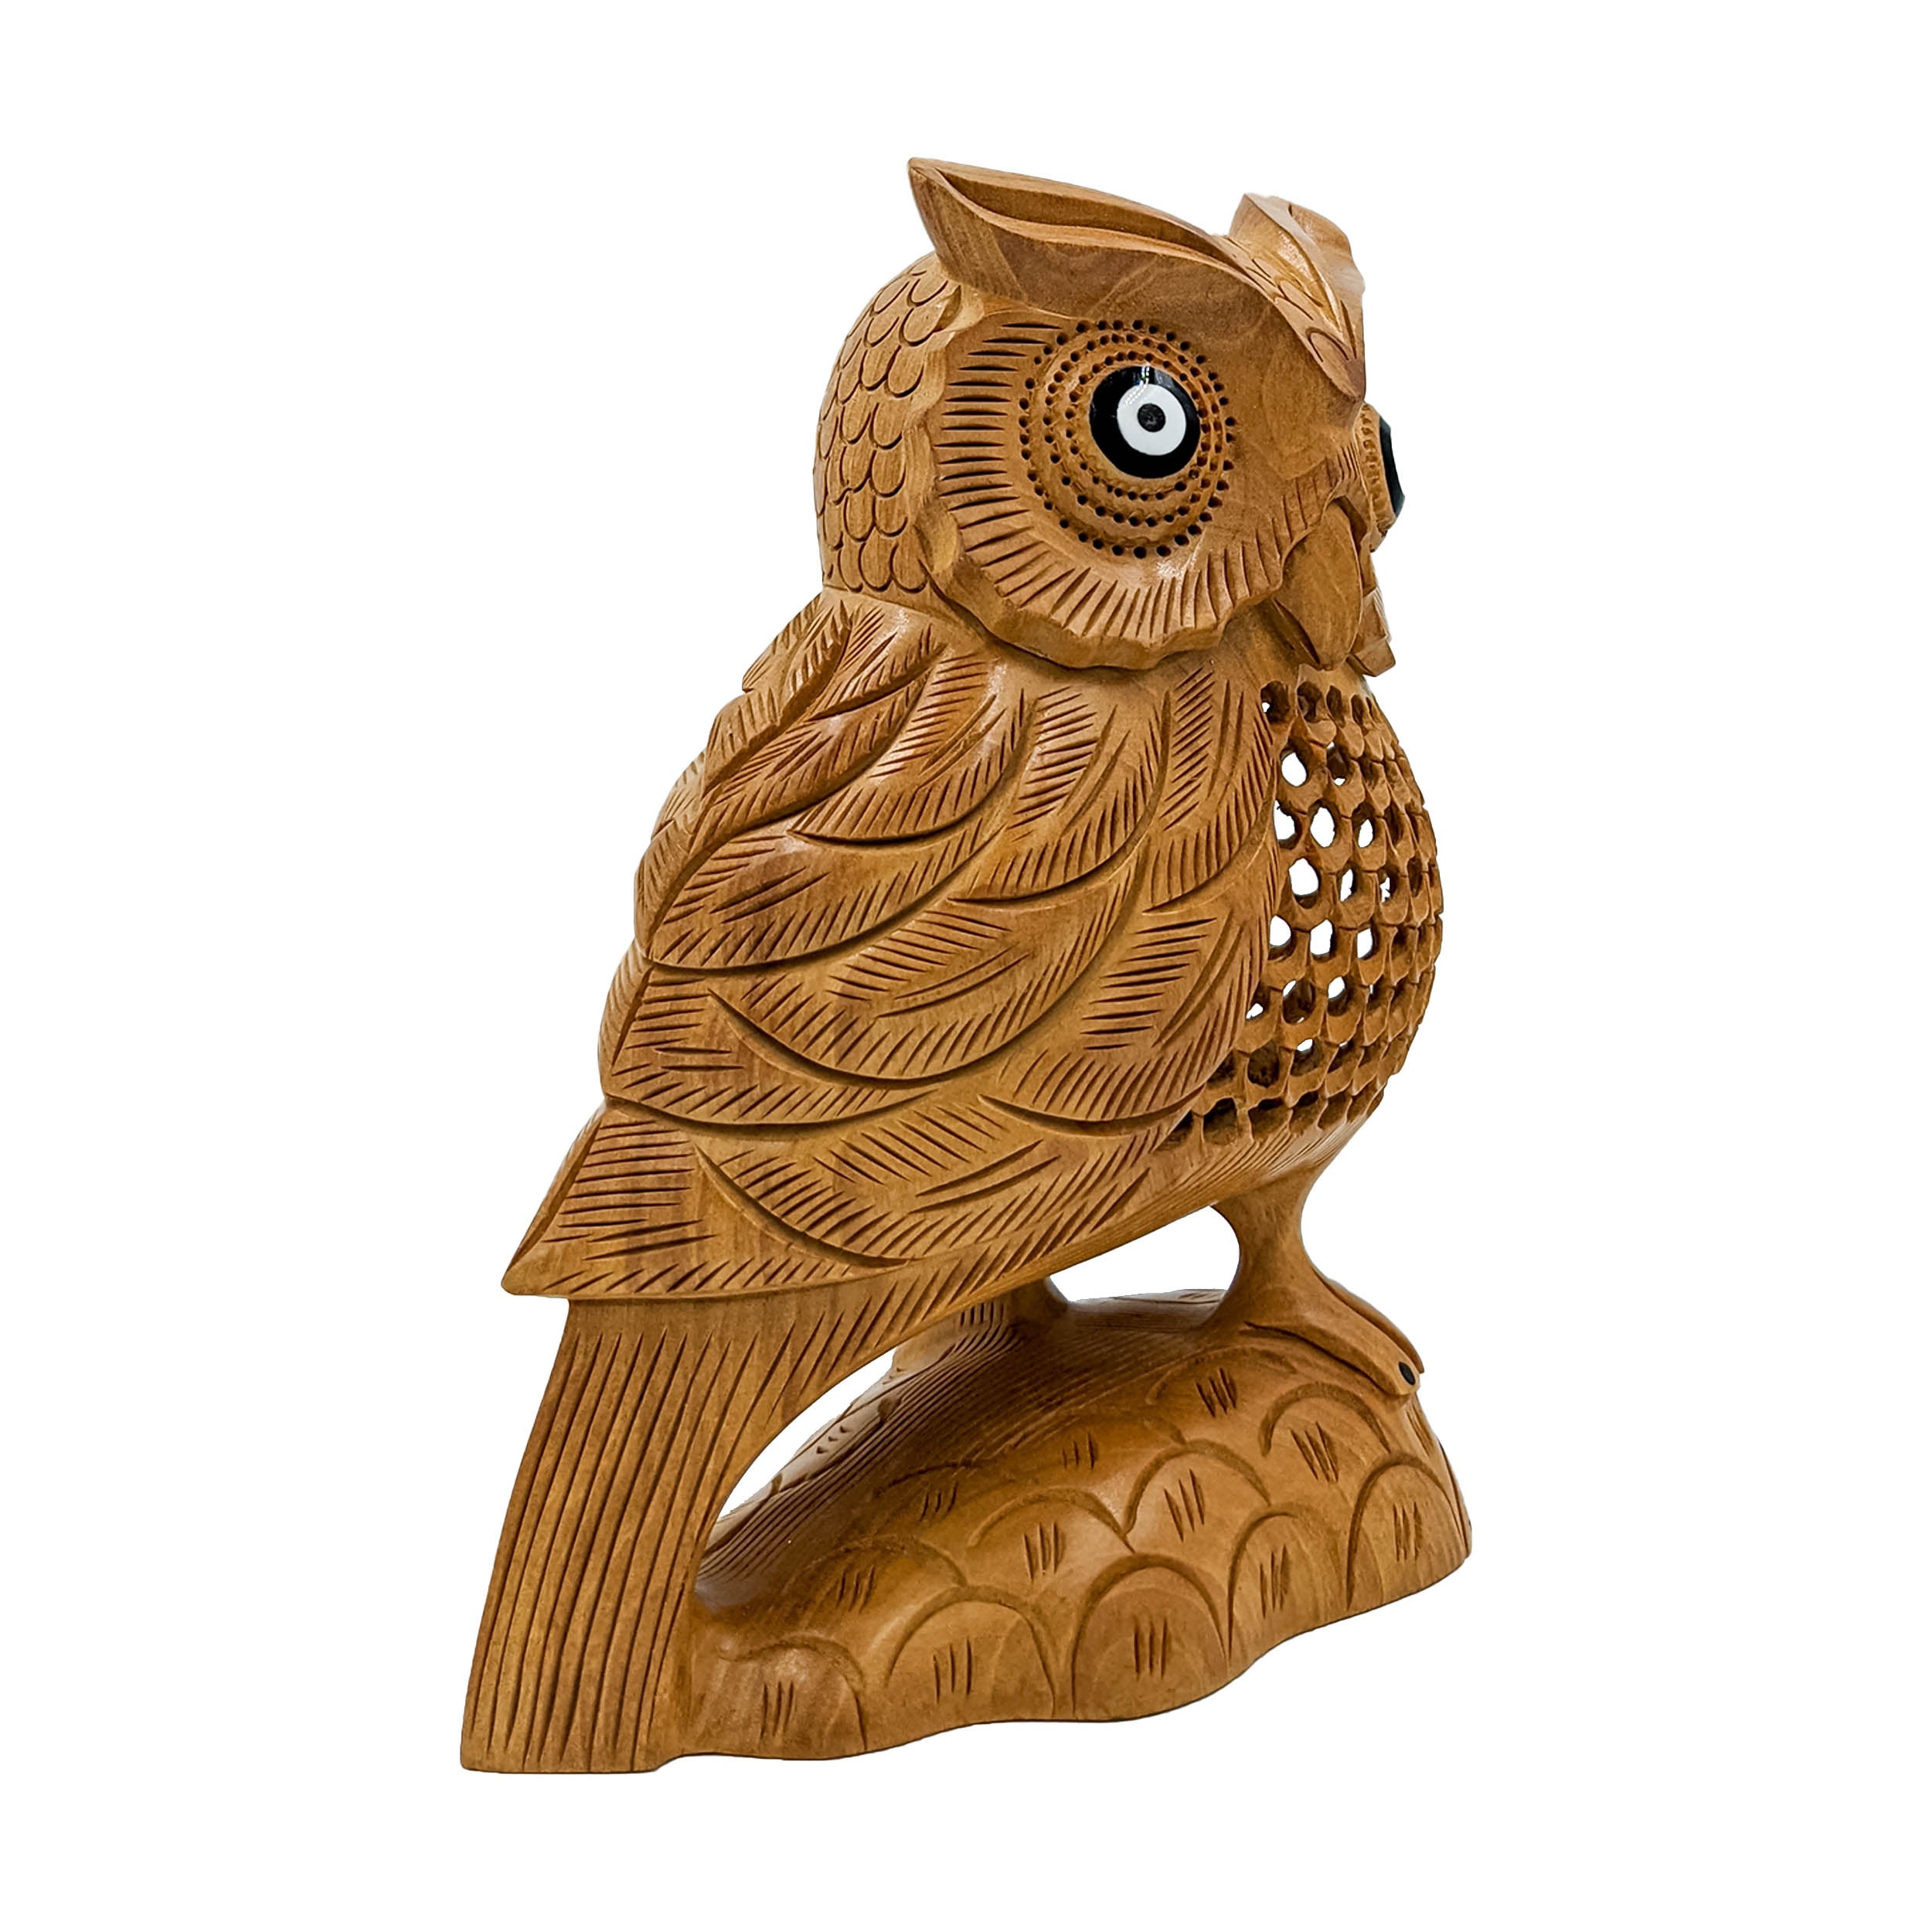 Wooden Handmade Carved Owl Statue 6-Inch